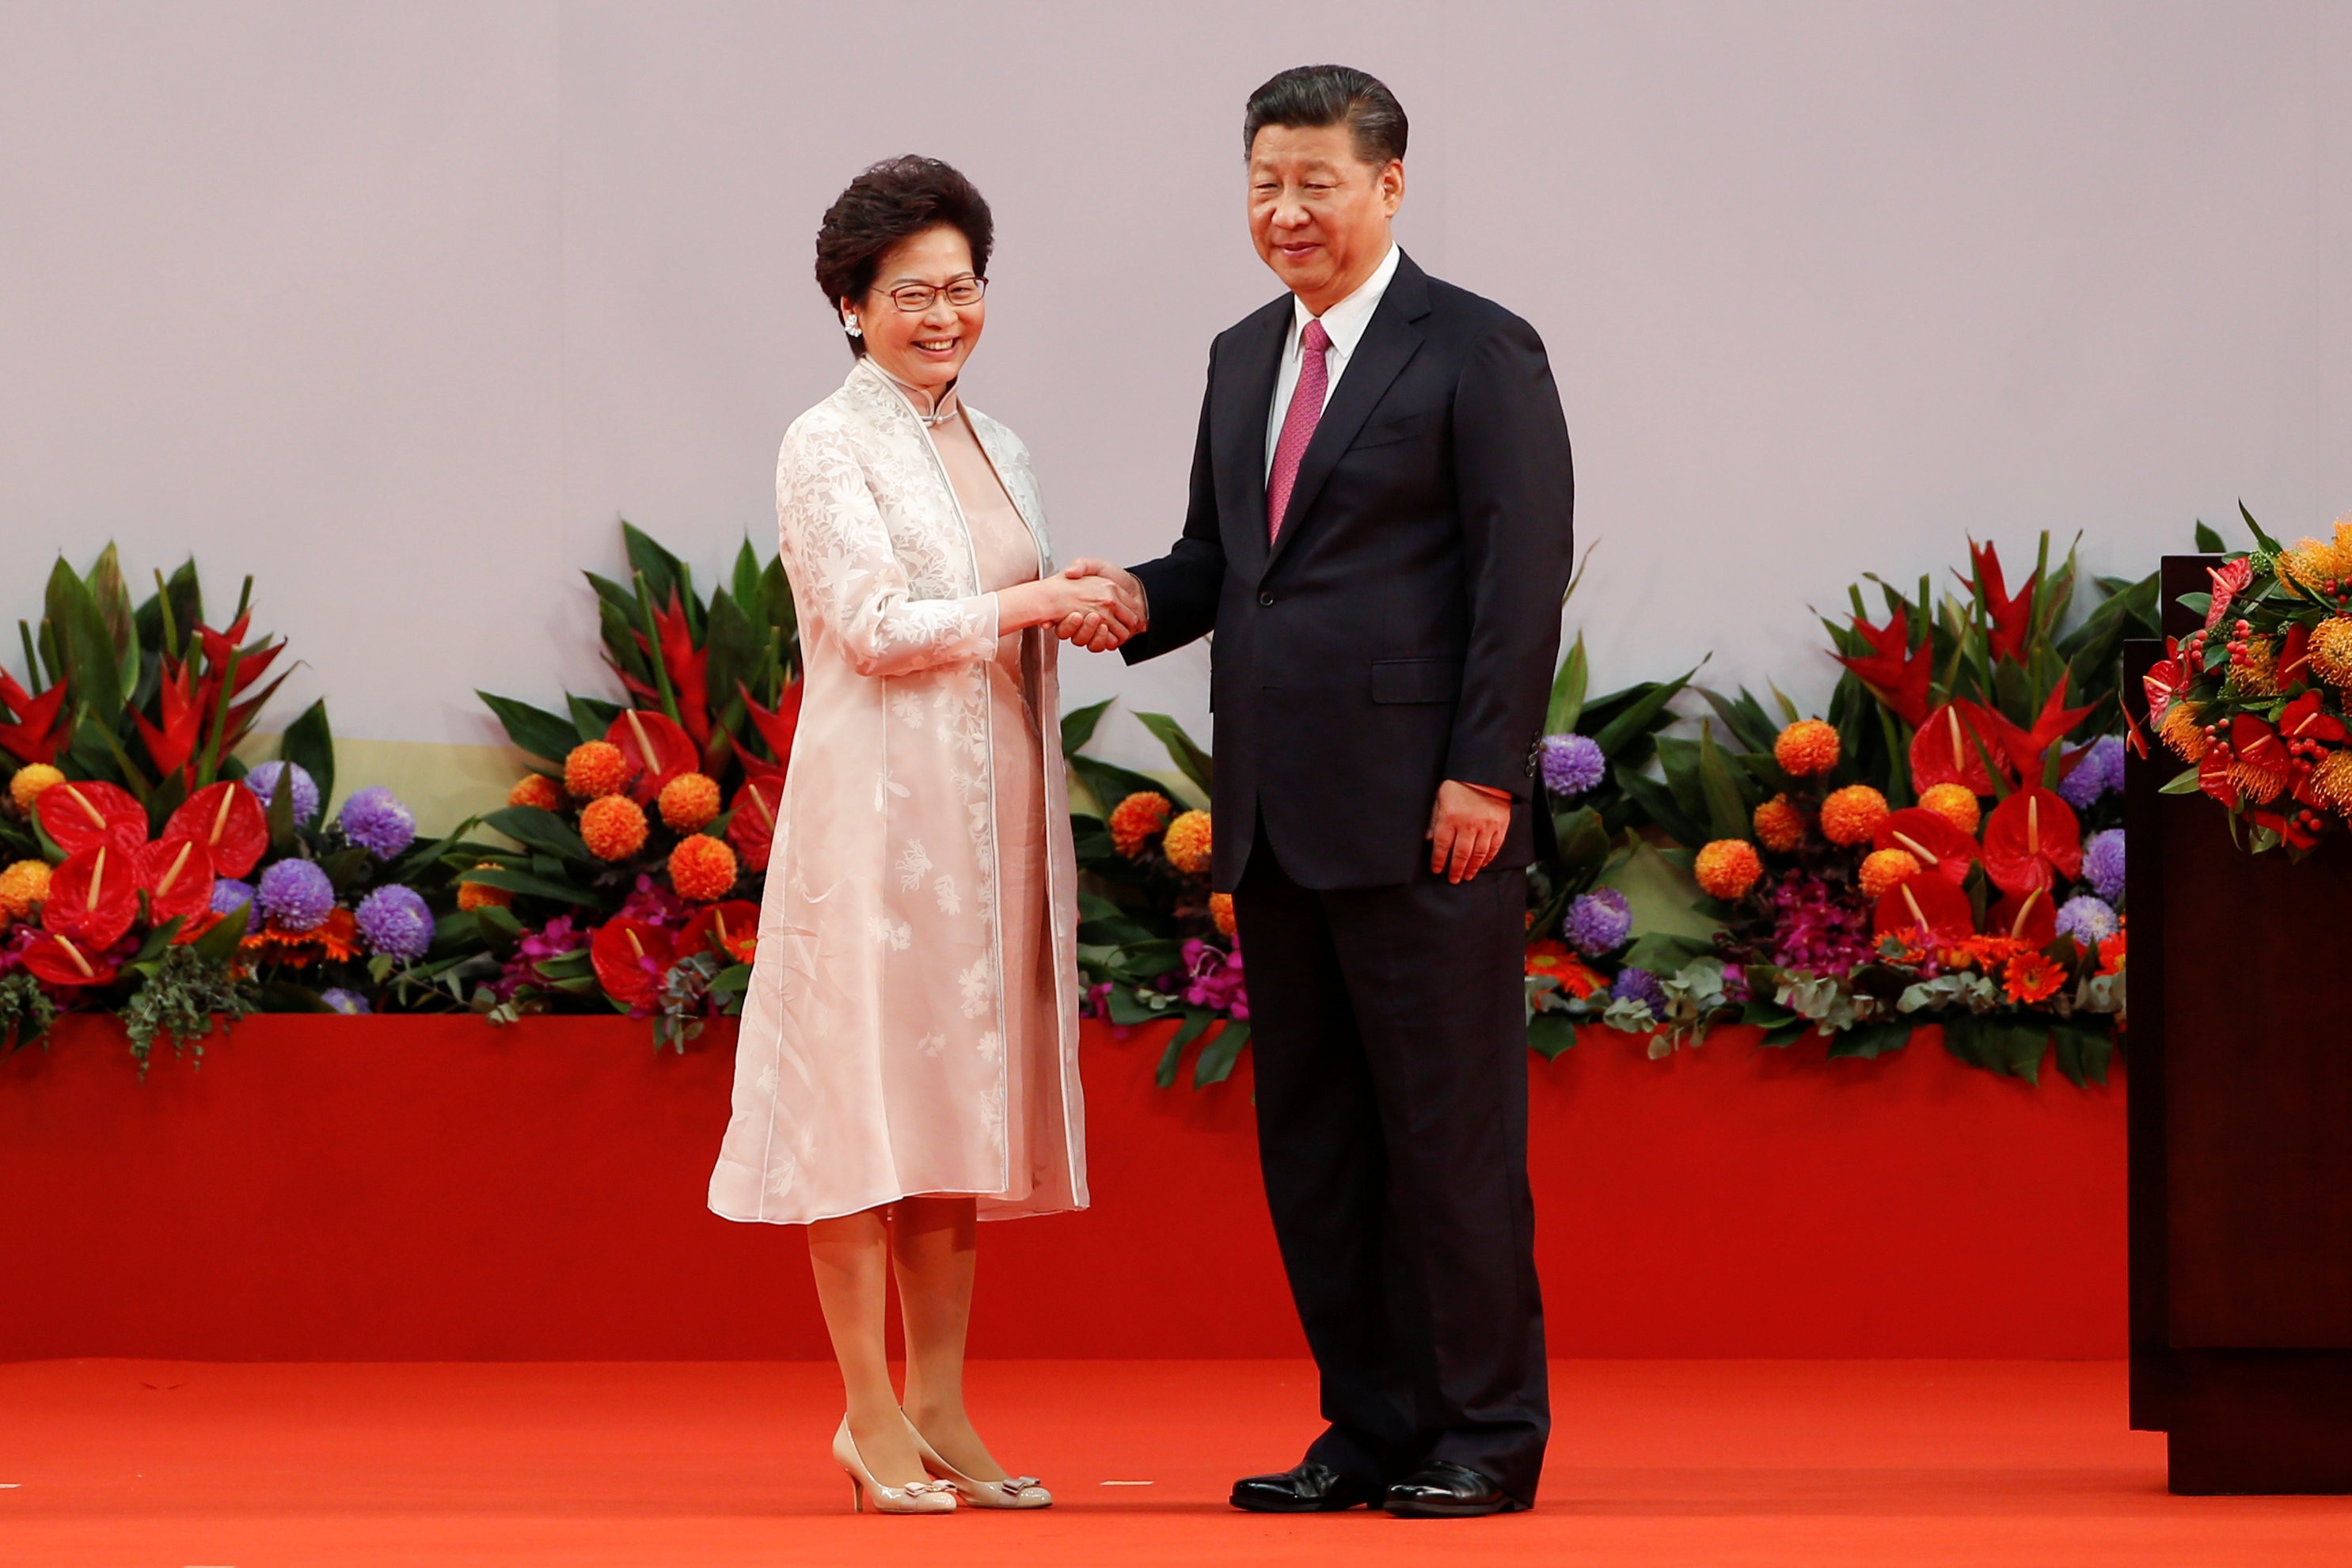 A resplendent Carrie Lam shakes hands with President Xi Jinping after being sworn in as chief executive. Photo: Reuters